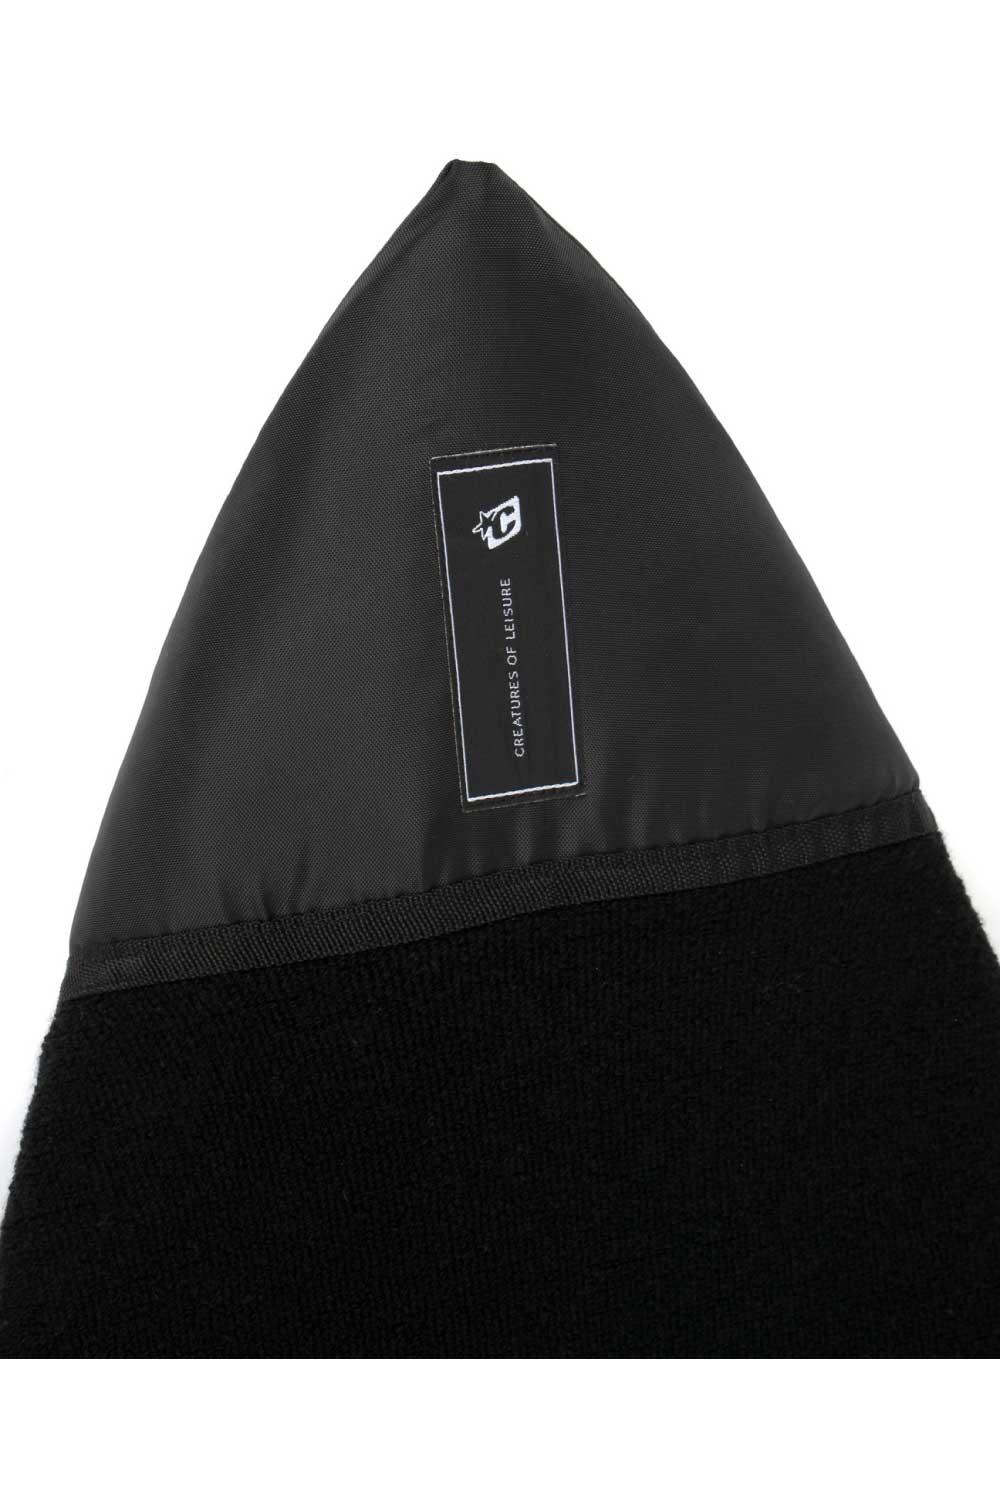 Creatures of Leisure Shortboard Icon Surfboard Sock (Sox) Black Cover